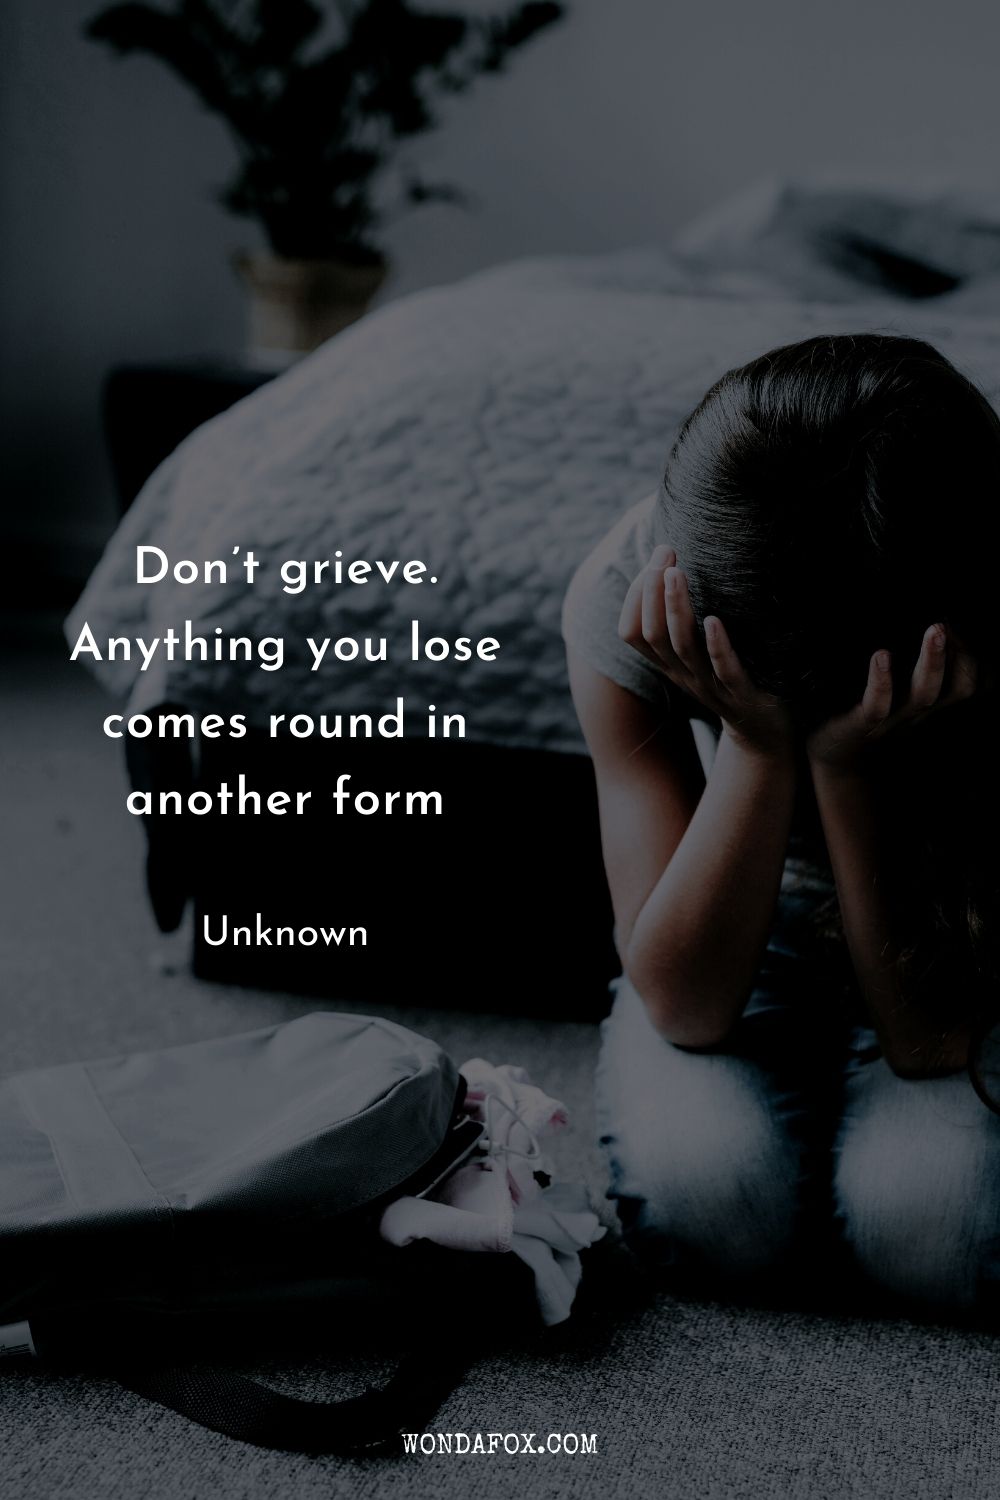 Don’t grieve. Anything you lose comes round in another form